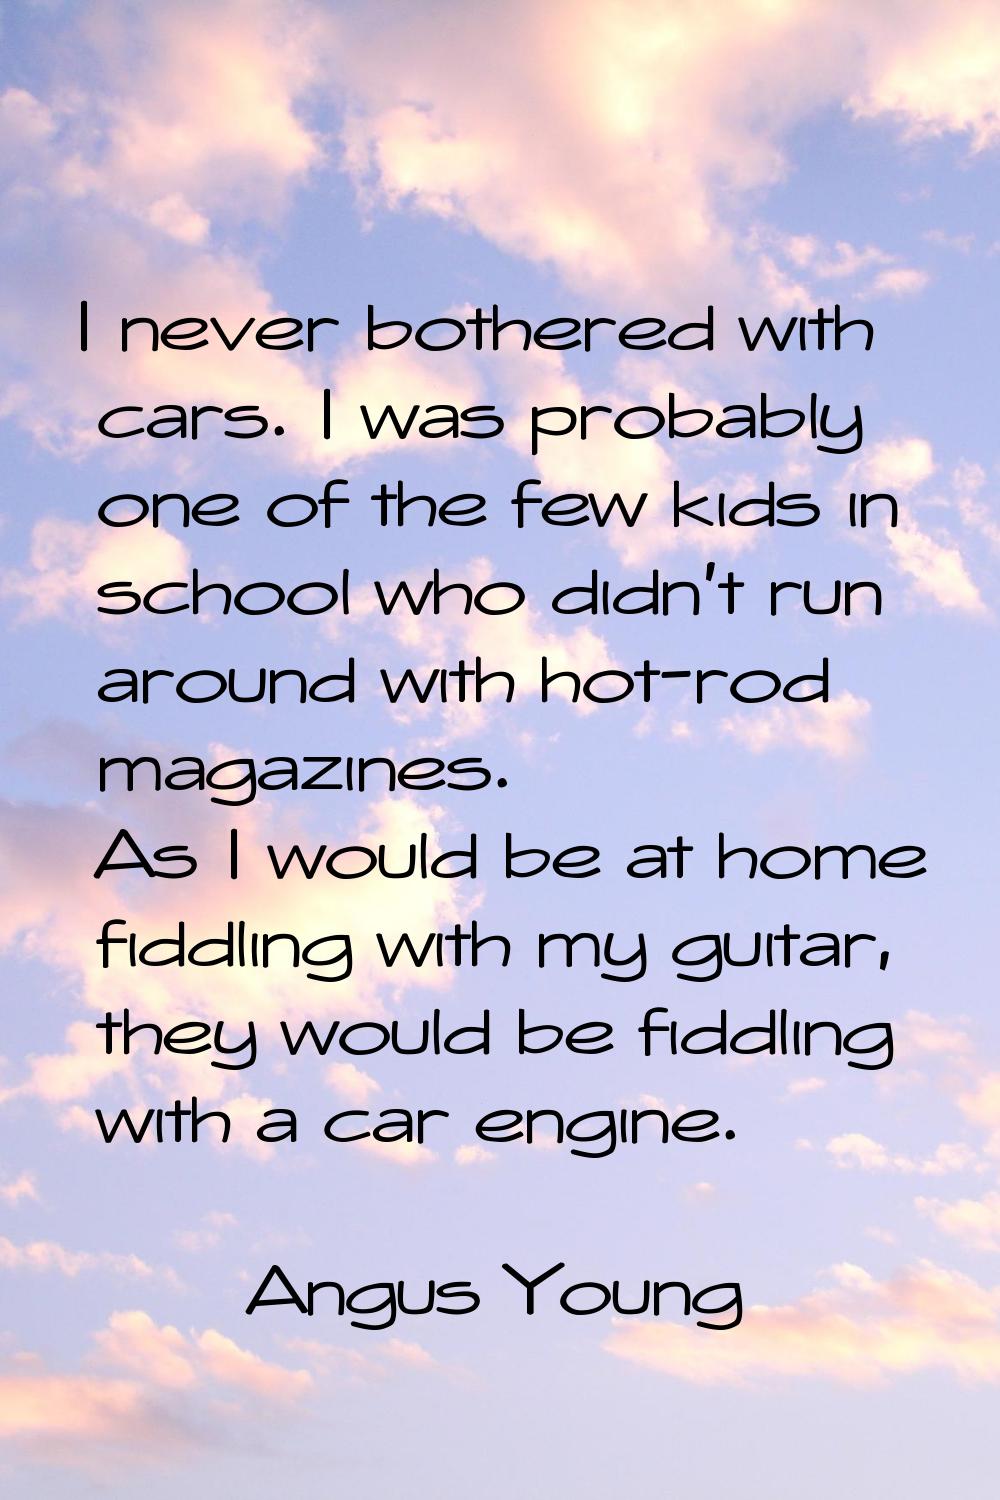 I never bothered with cars. I was probably one of the few kids in school who didn't run around with